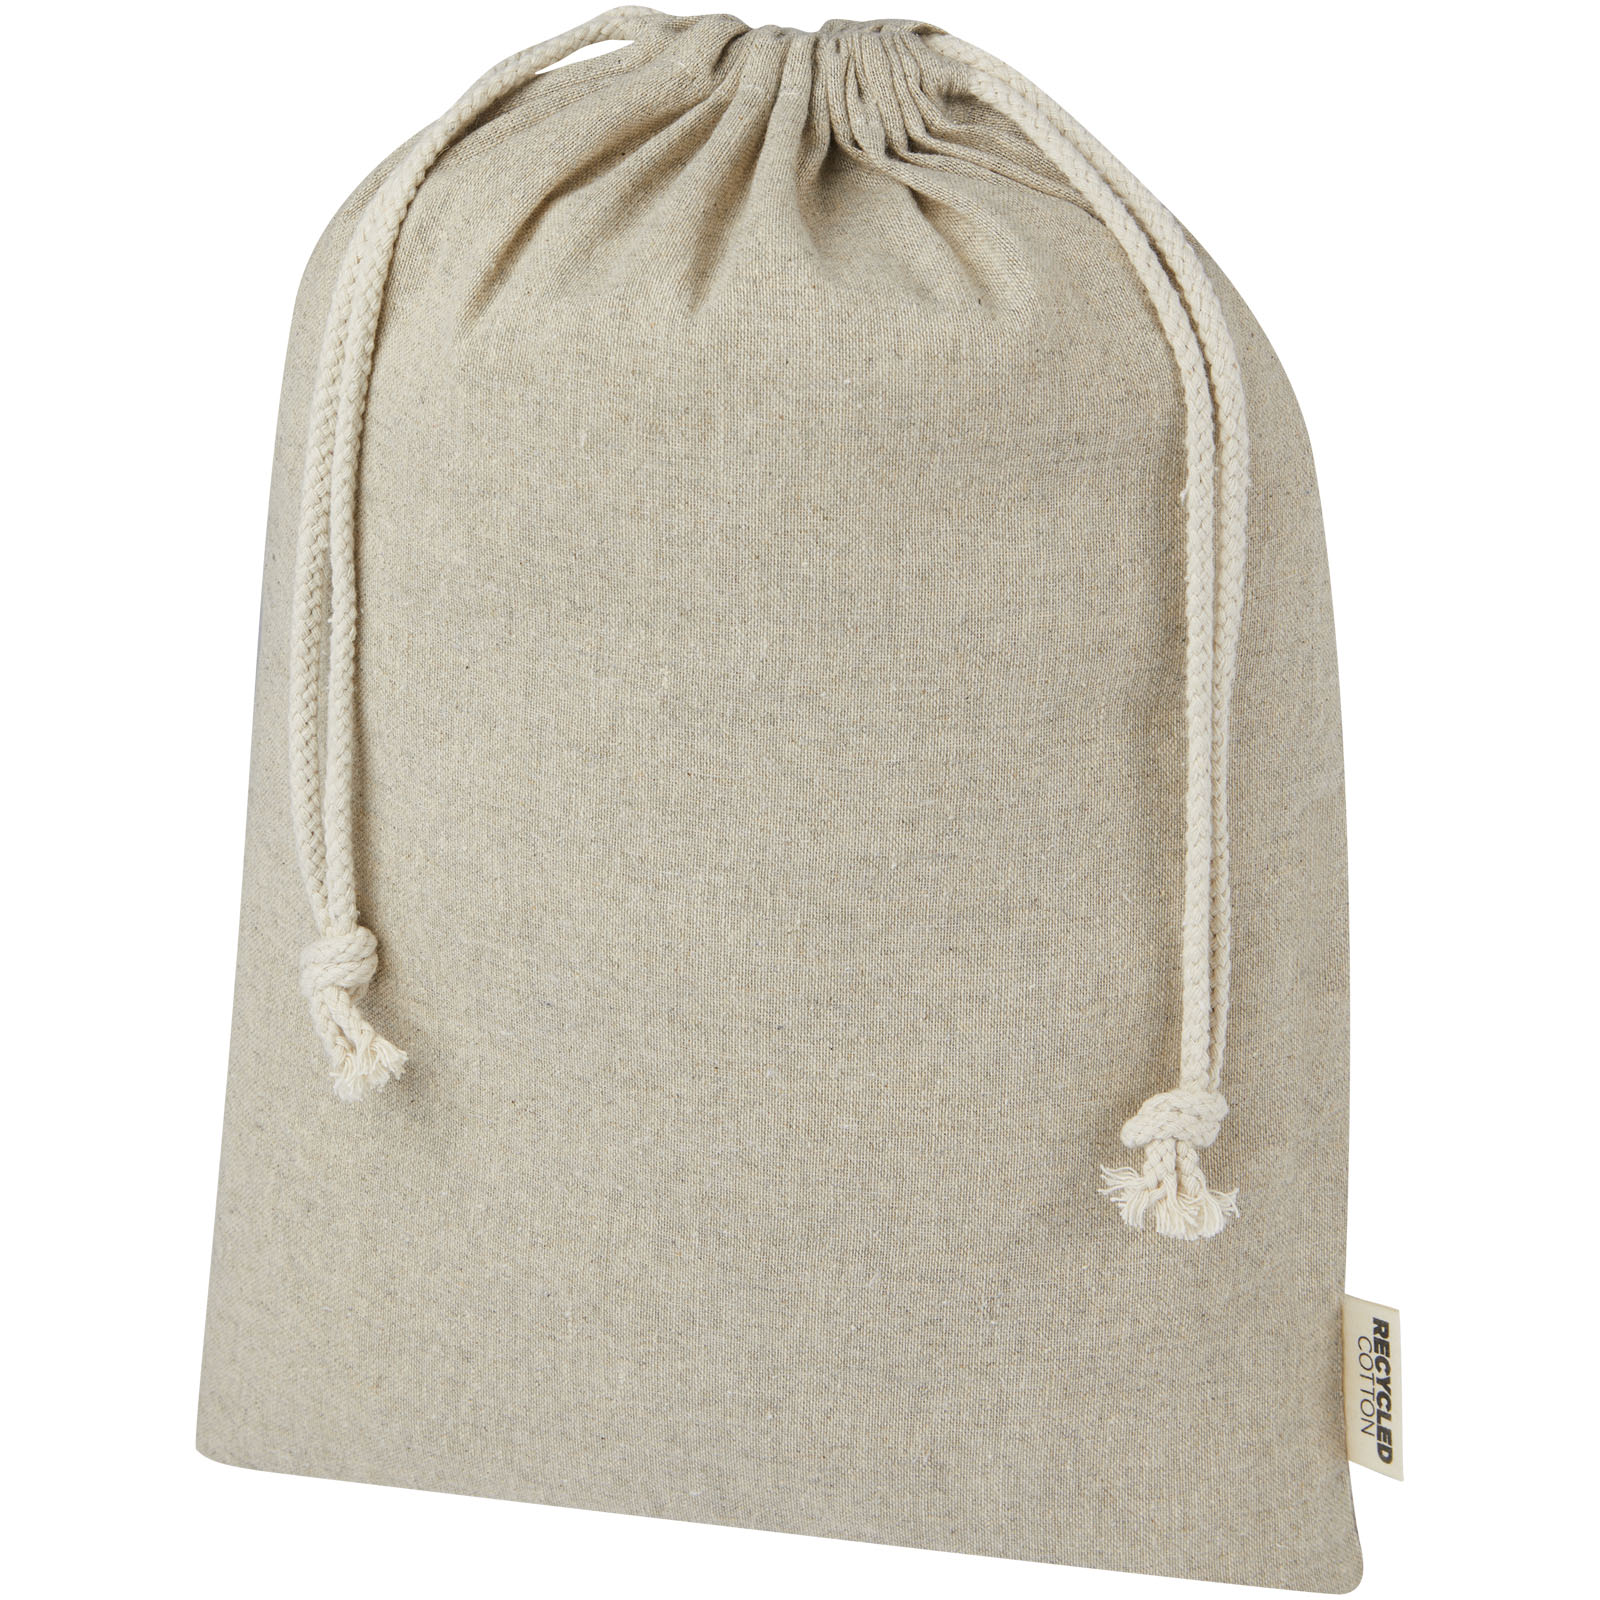 Advertising Cotton Bags - Pheebs 150 g/m² GRS recycled cotton gift bag large 4L